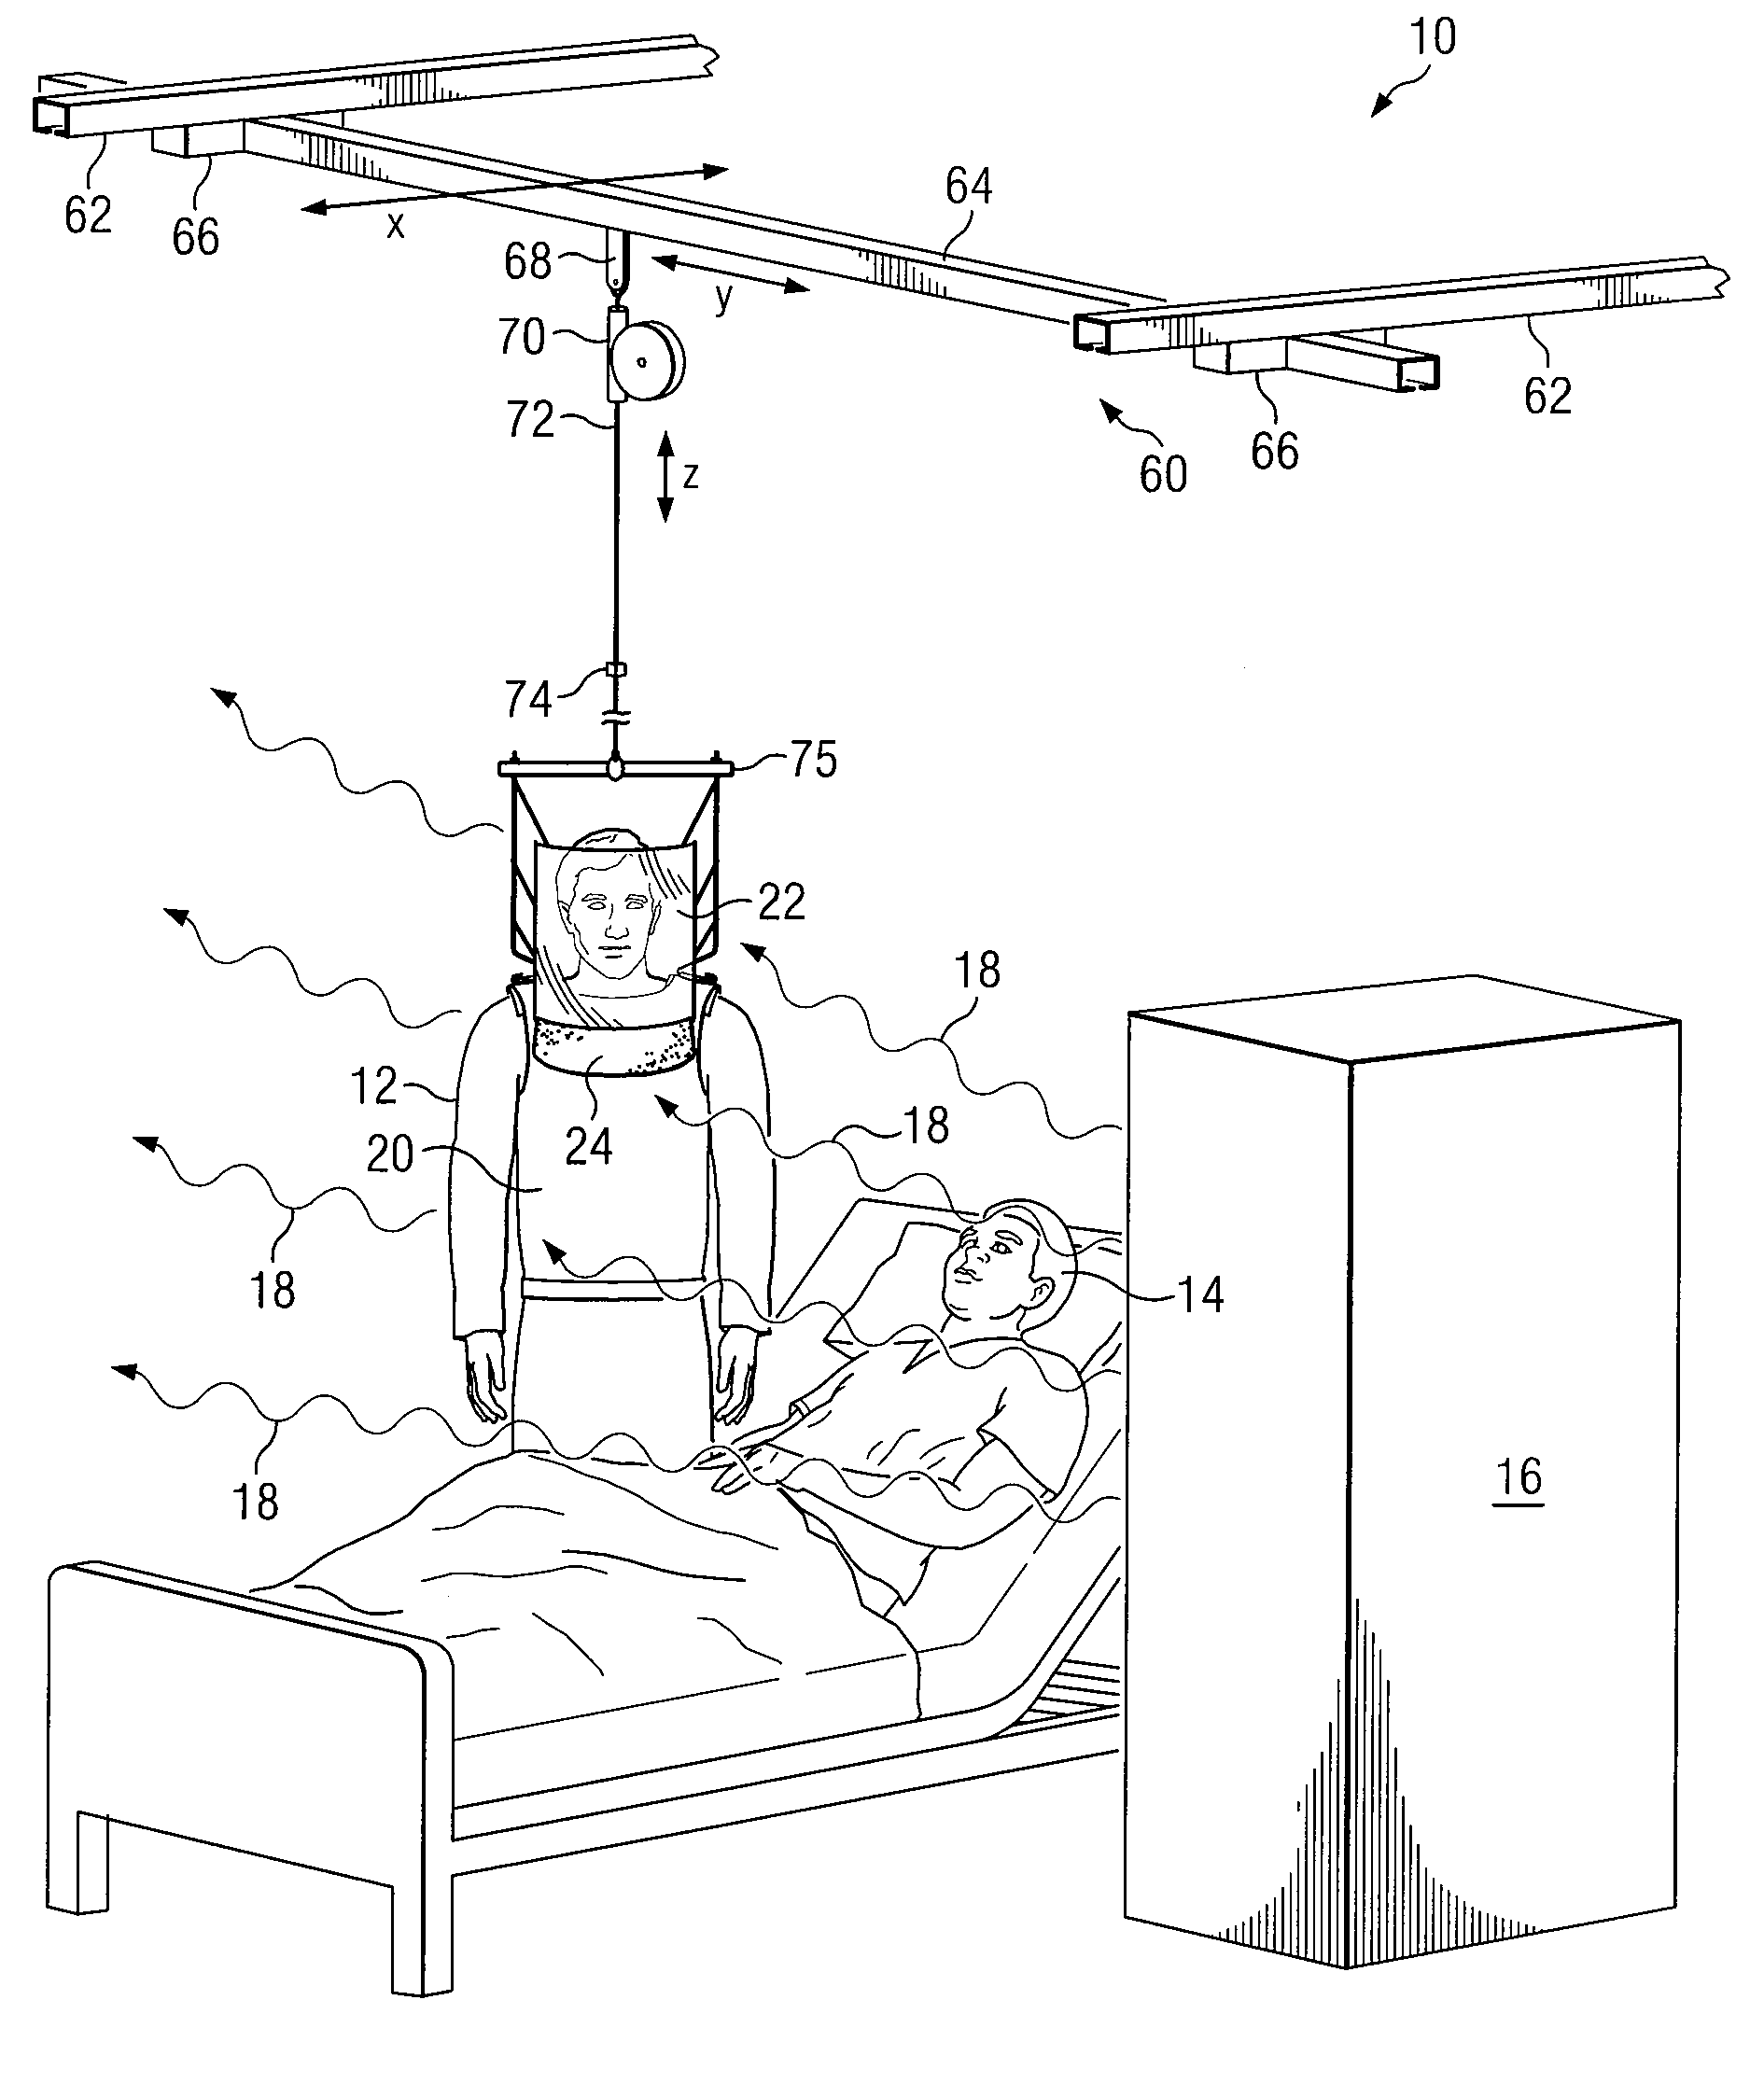 System and method for implementing a suspended personal radiation protection system